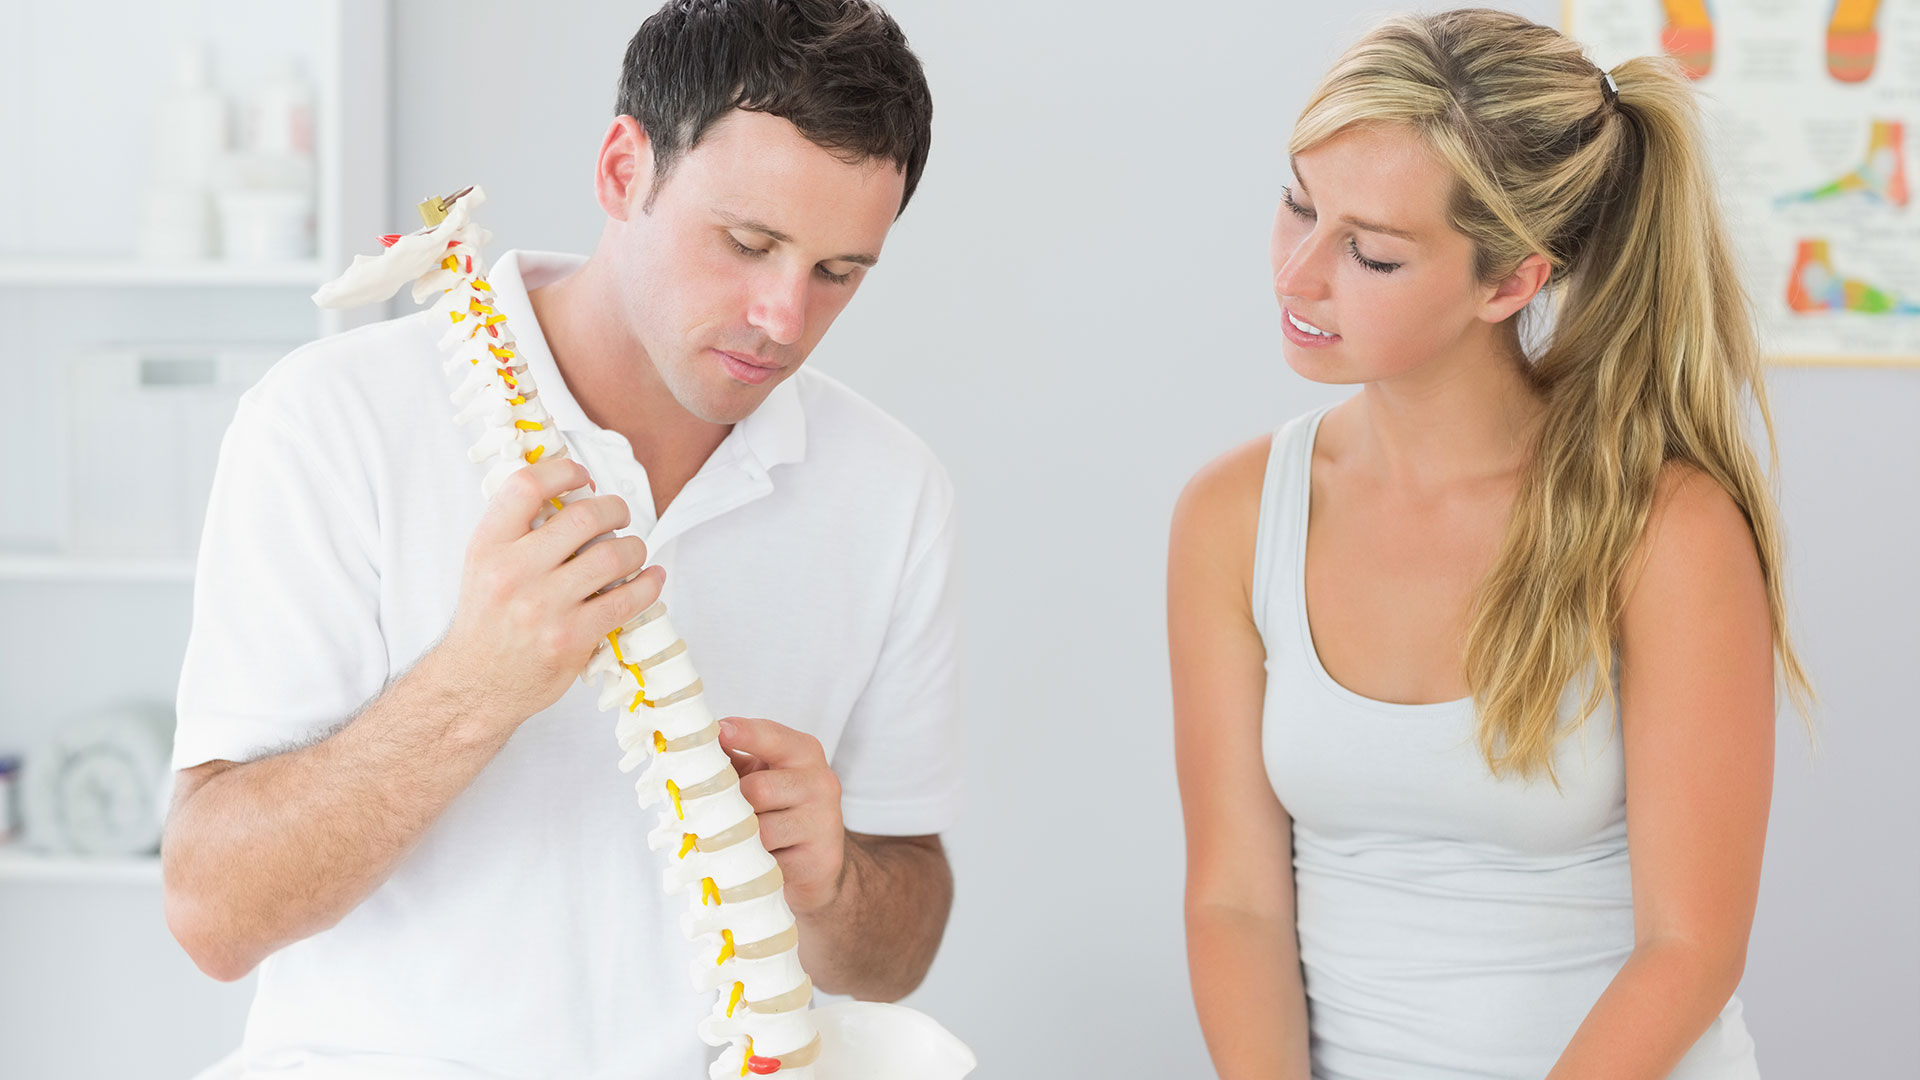 How to Choose the Right Chiropractor for Your Treatment